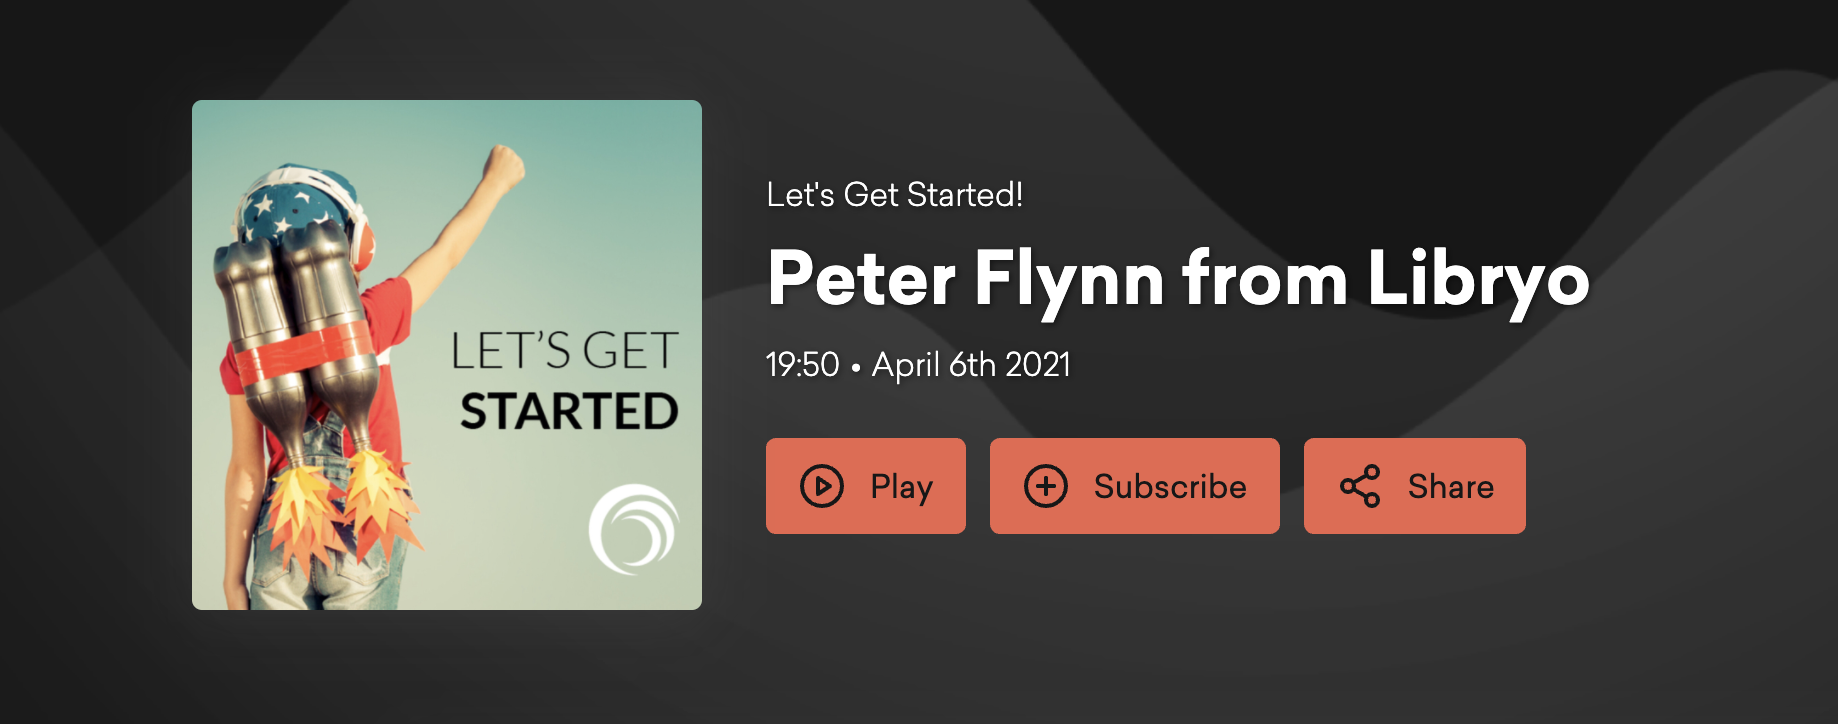 https://pod.co/lets-get-started/peter-flynn-from-libryo